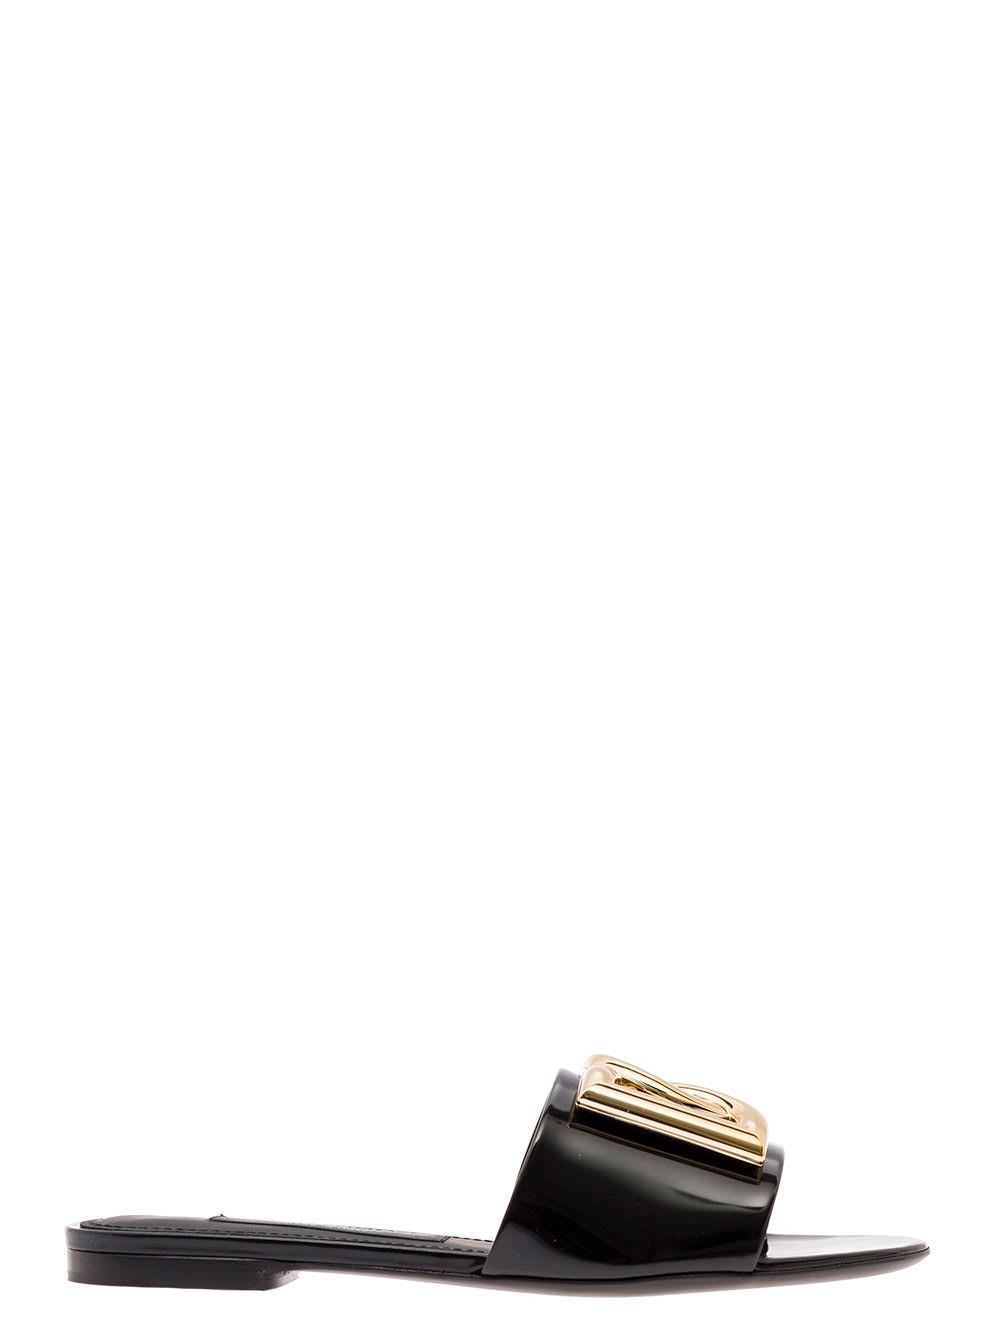 DOLCE & GABBANA BLACK SLIDERS WITH METAL DG LOGO IN POLISHED LEATHER WOMAN